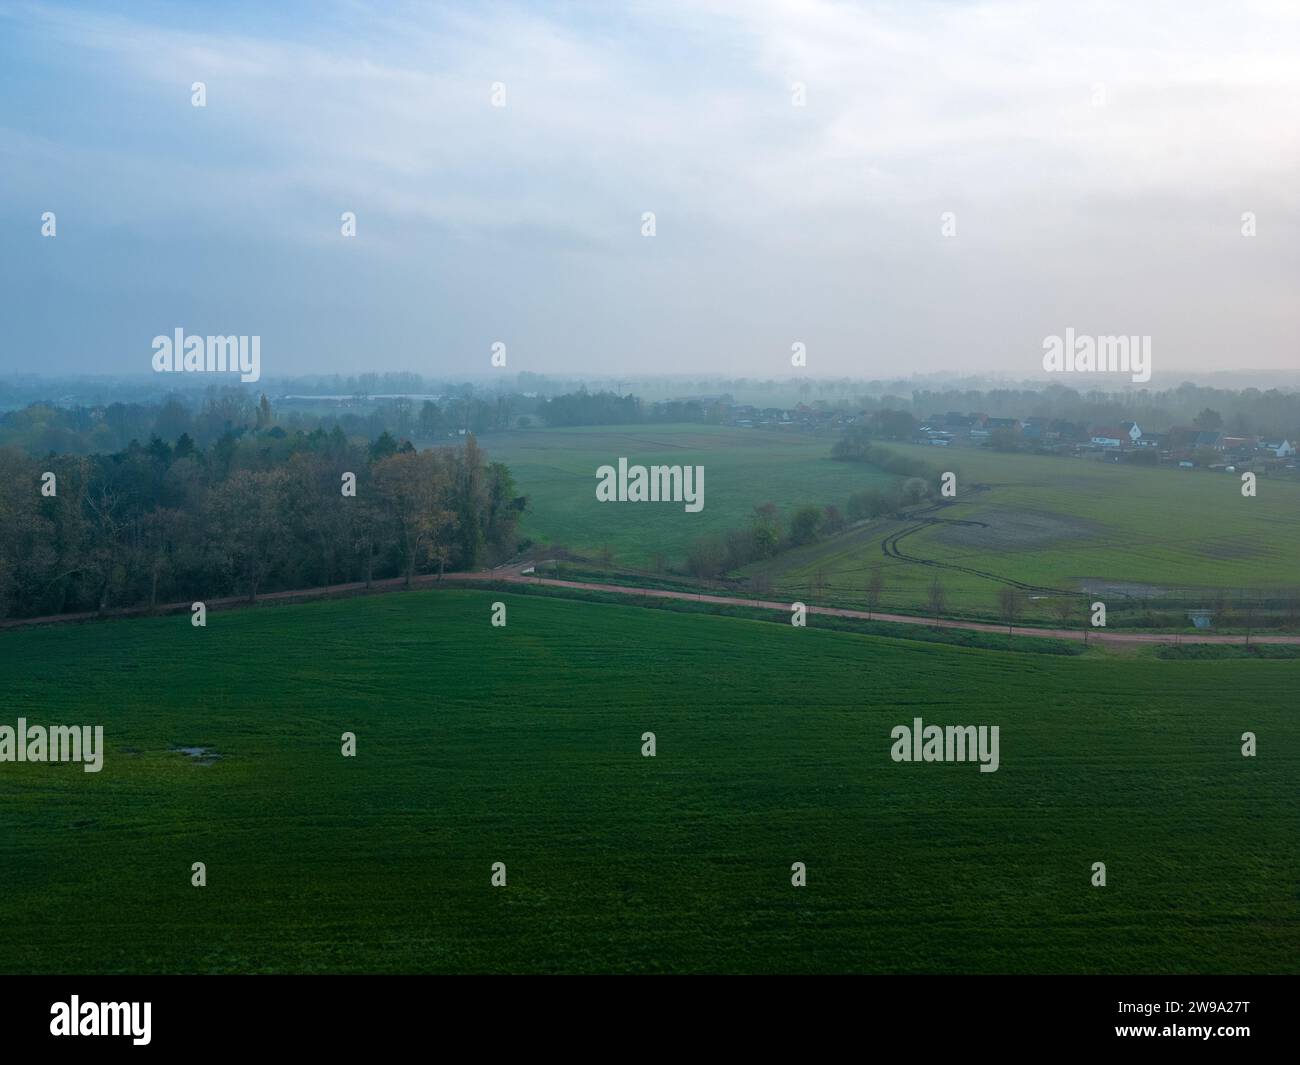 The image captures the serene essence of a misty morning over a sprawling farmland. The soft light of dawn diffuses through the haze, casting a gentle glow over the green fields. The distant horizon is barely visible, shrouded in the morning mist, which gives the landscape an ethereal quality. The curved lines of the terrain and the subtle shades of green create a peaceful, pastoral scene that evokes a sense of tranquility and the slow awakening of the countryside. Misty Dawn Over Gentle Rolling Farmland. High quality photo Stock Photo